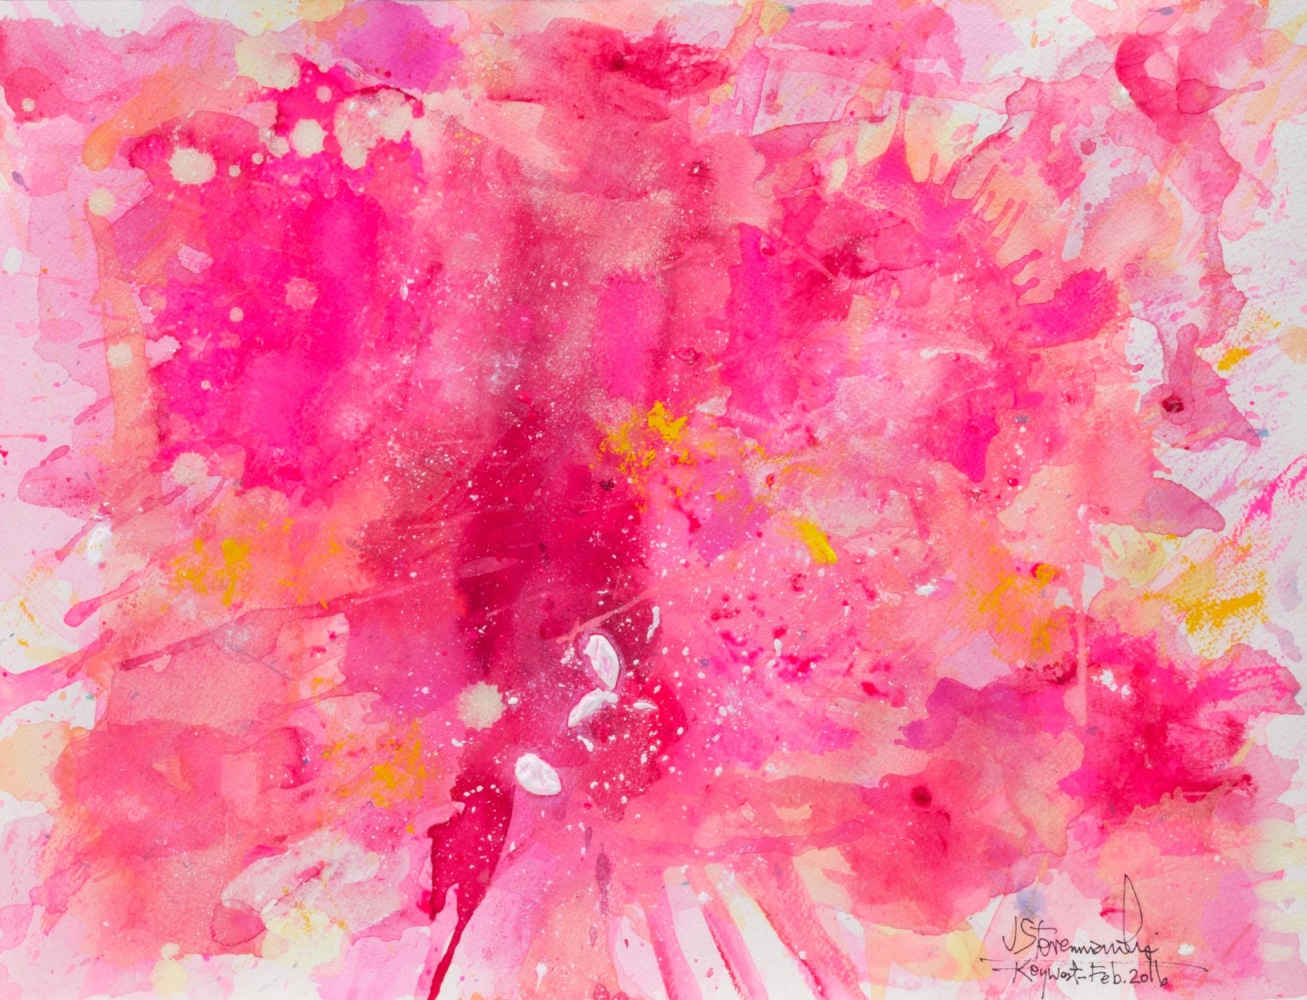 J. Steven Manolis-Flamingo-Key West, 1832-2016-1216.05, watercolor, gouache and acrylic painting on Arches paper, 12 x 16 inches, Pink Abstract Art, Tropical Watercolor paintings for sale at Manolis Projects Art Gallery, Miami, Fl